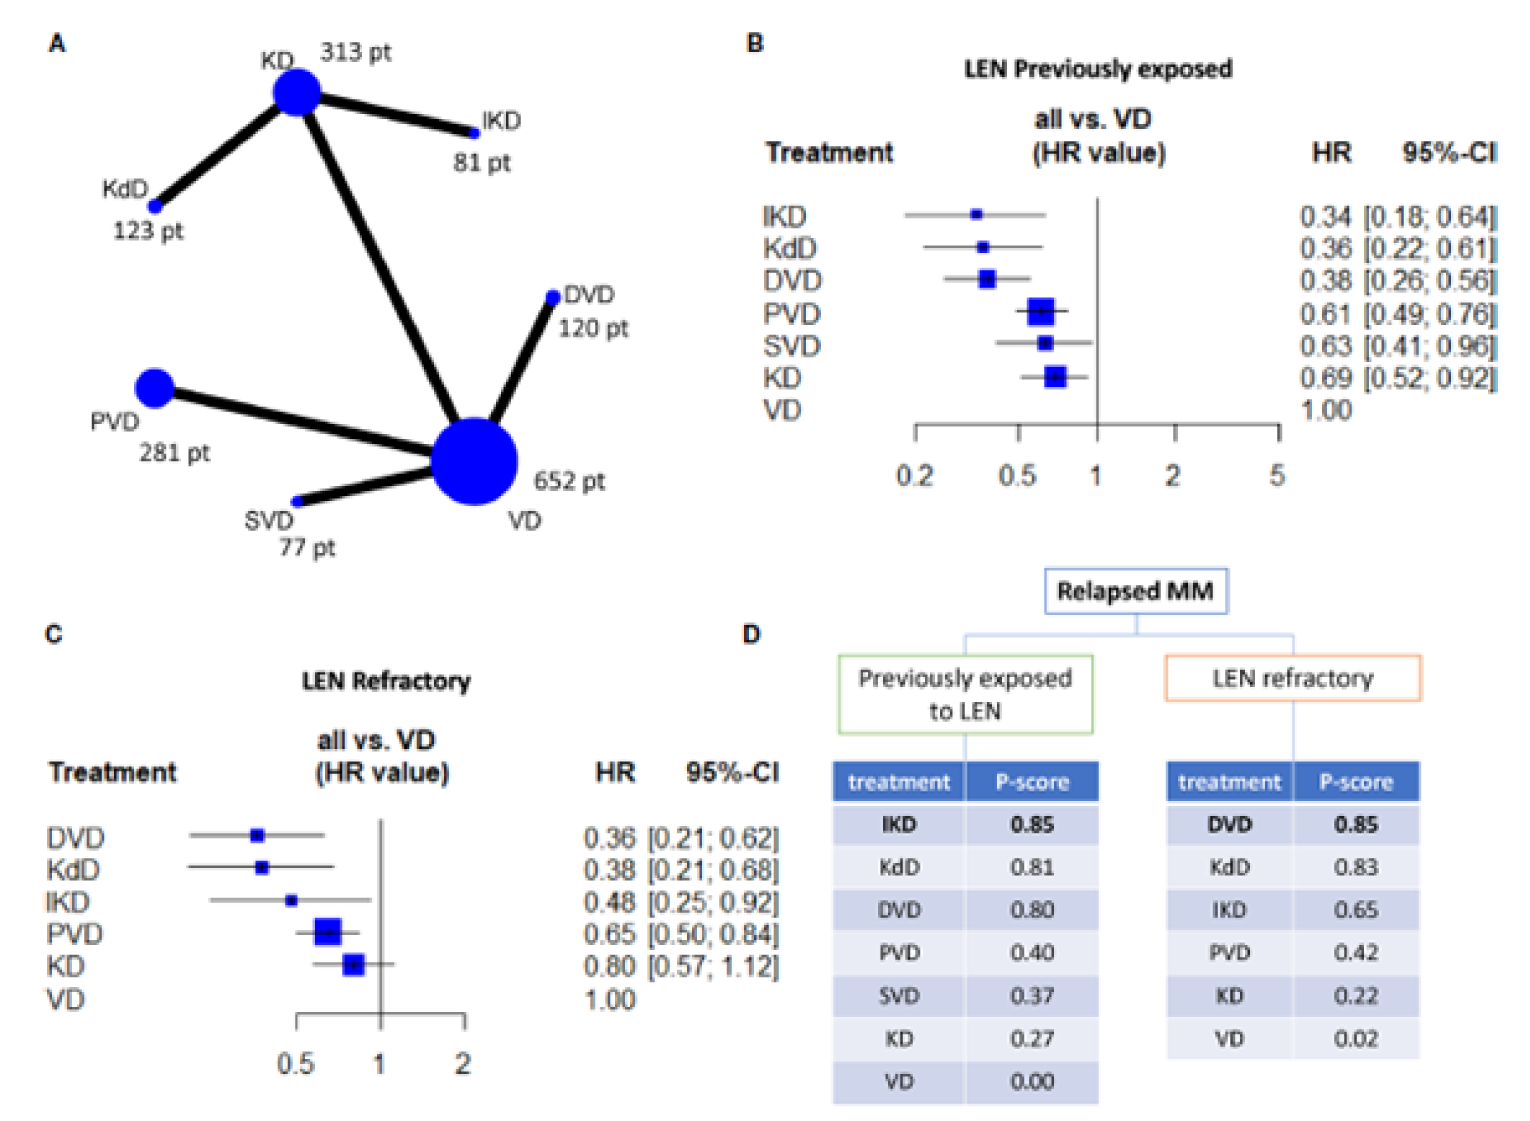 Four figures including a network plot showing all the direct comparisons and the number of patients included in each node (i.e., the total number of patients receiving the treatment indicated in the node), 2 forest plots indicating the efficacy of each regimen (in terms of hazards ratio and 95% confidence intervals) by using VD as comparator arms, and a ranking chart of all the evaluated regimens based on the P score and grouped according to previous exposure or resistance to lenalidomide.